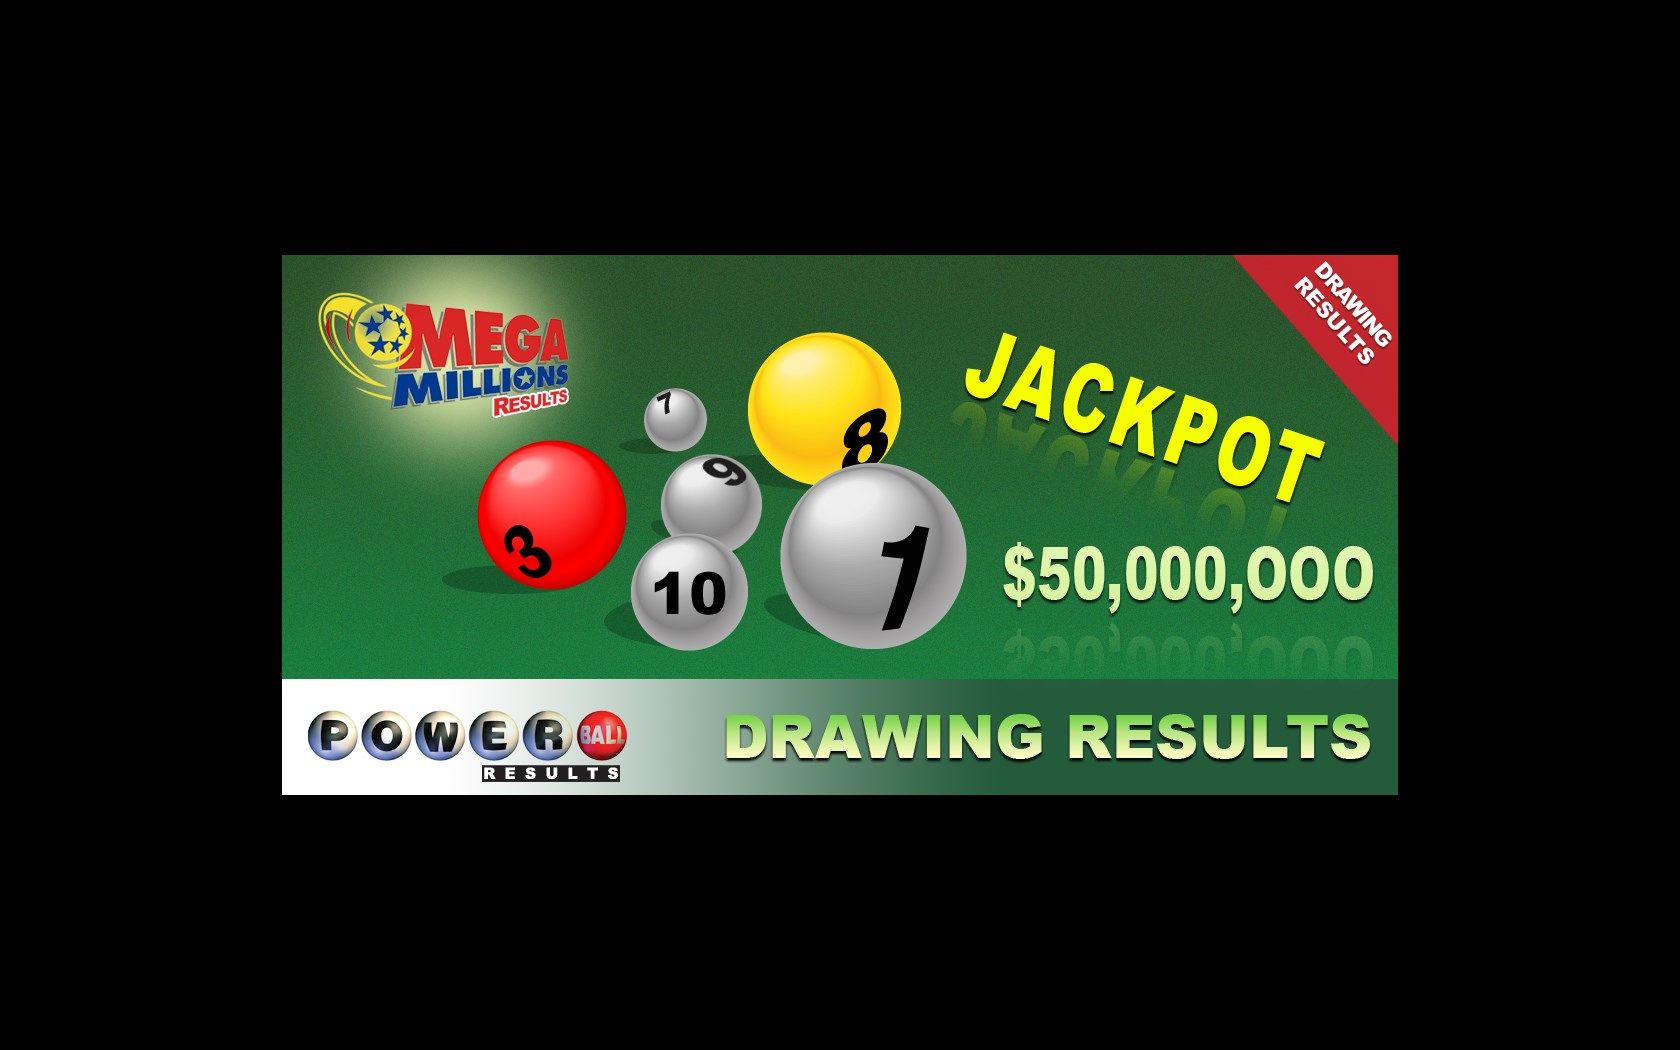 Get the latest Mega Millions and Powerball drawing results.